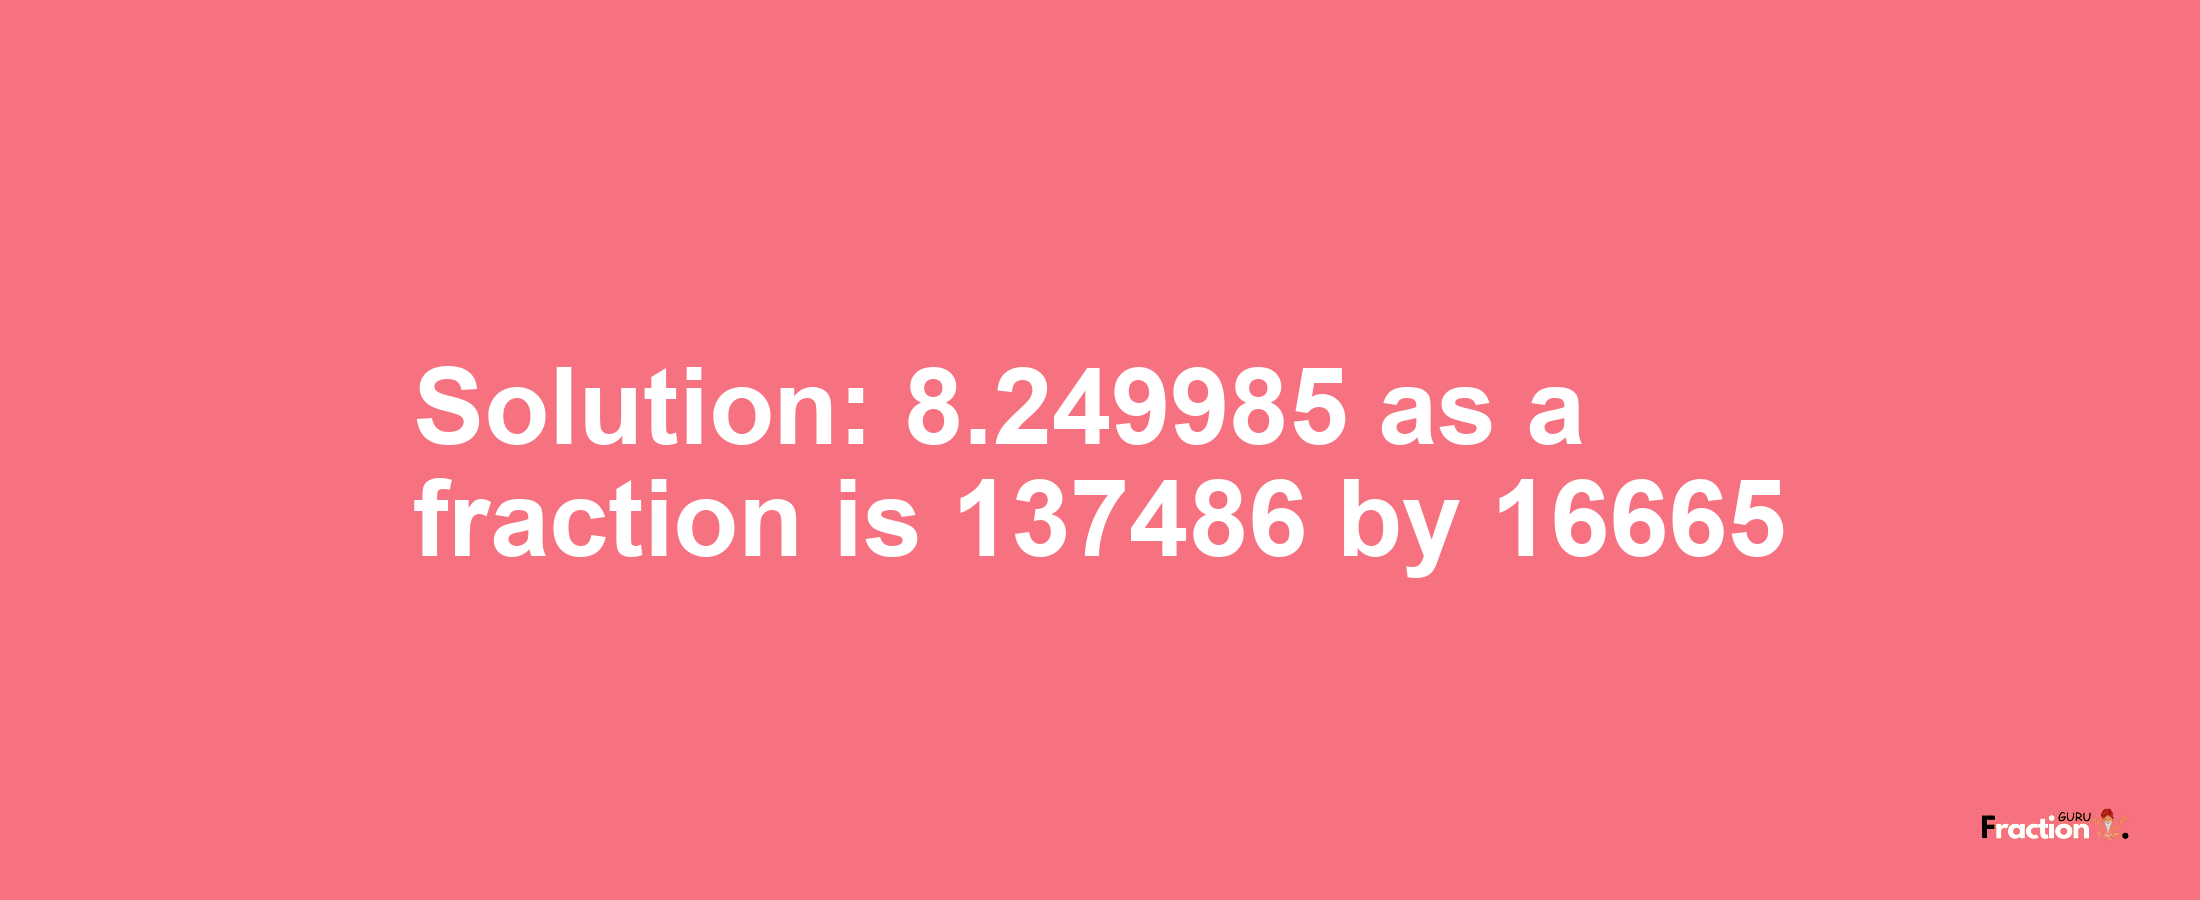 Solution:8.249985 as a fraction is 137486/16665